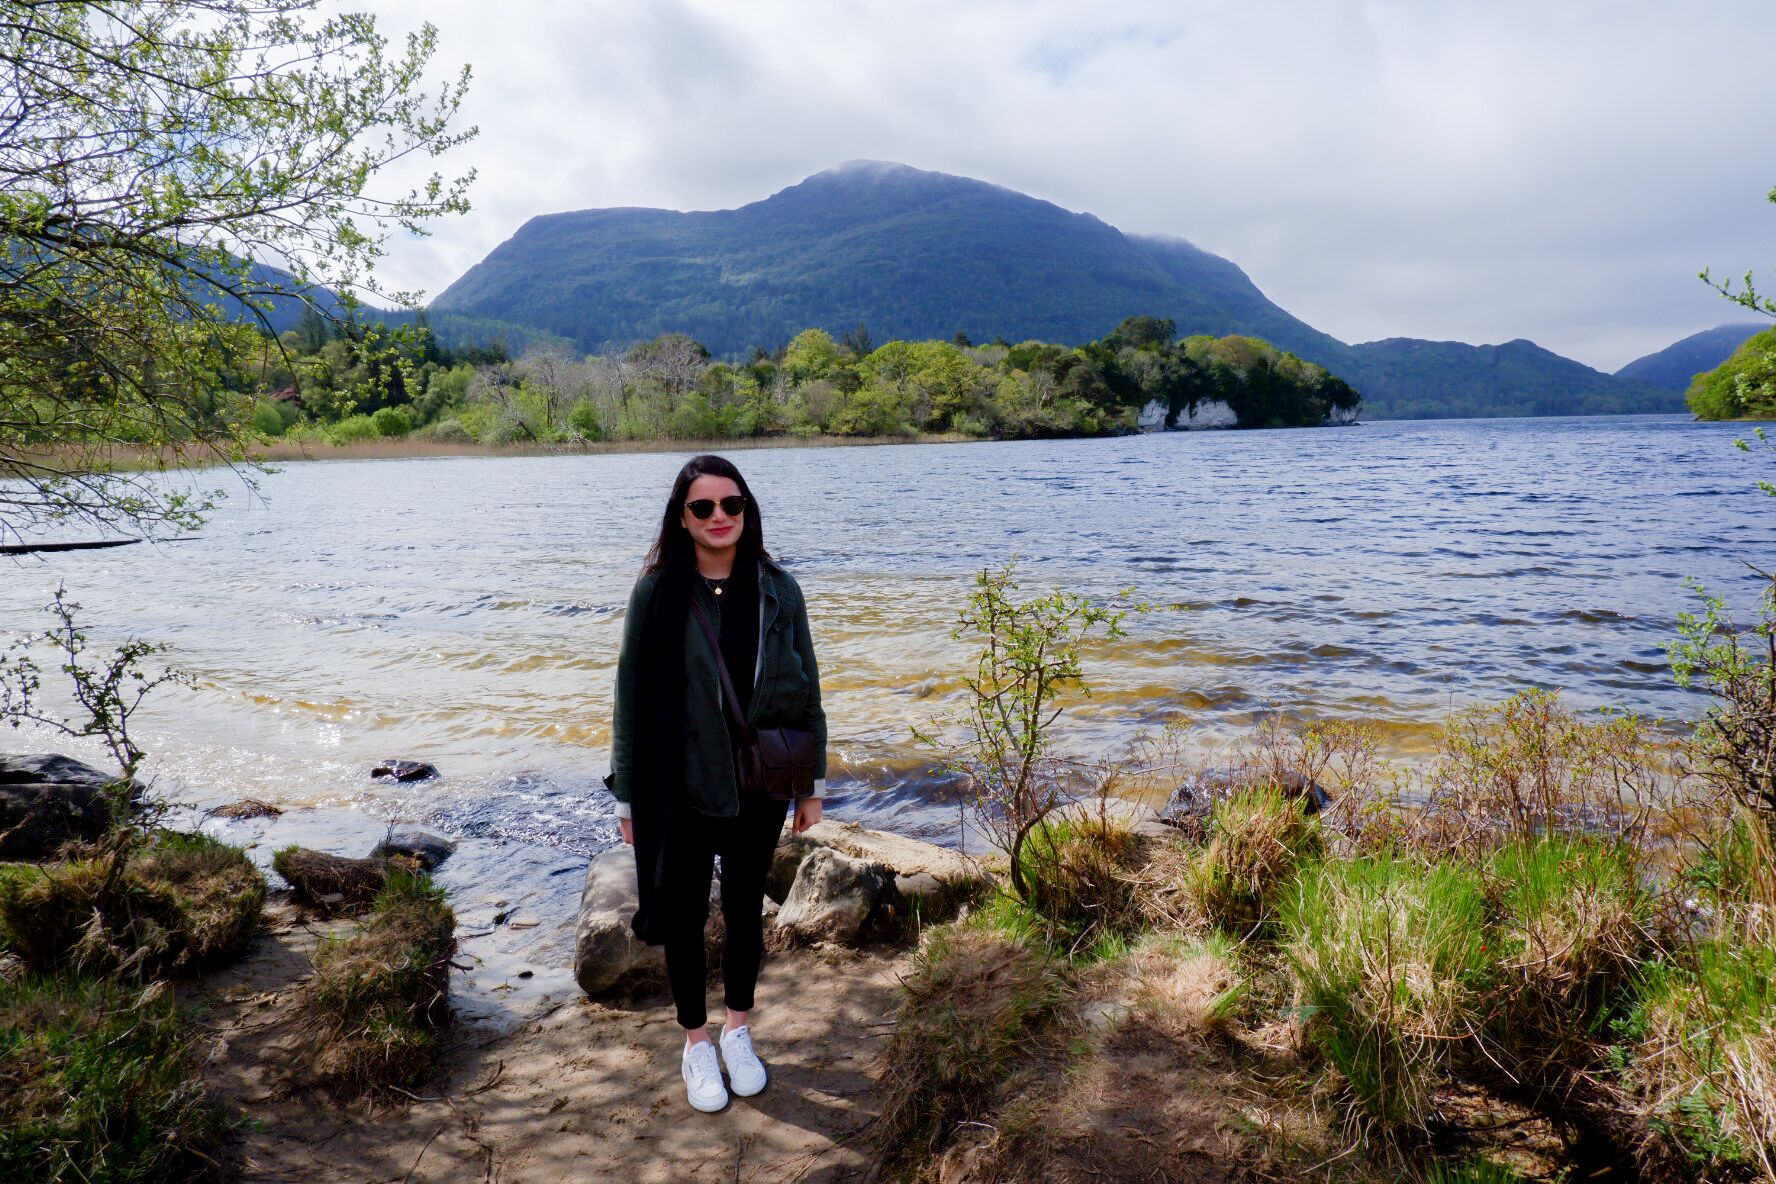 Making the most of my life as a student in Ireland